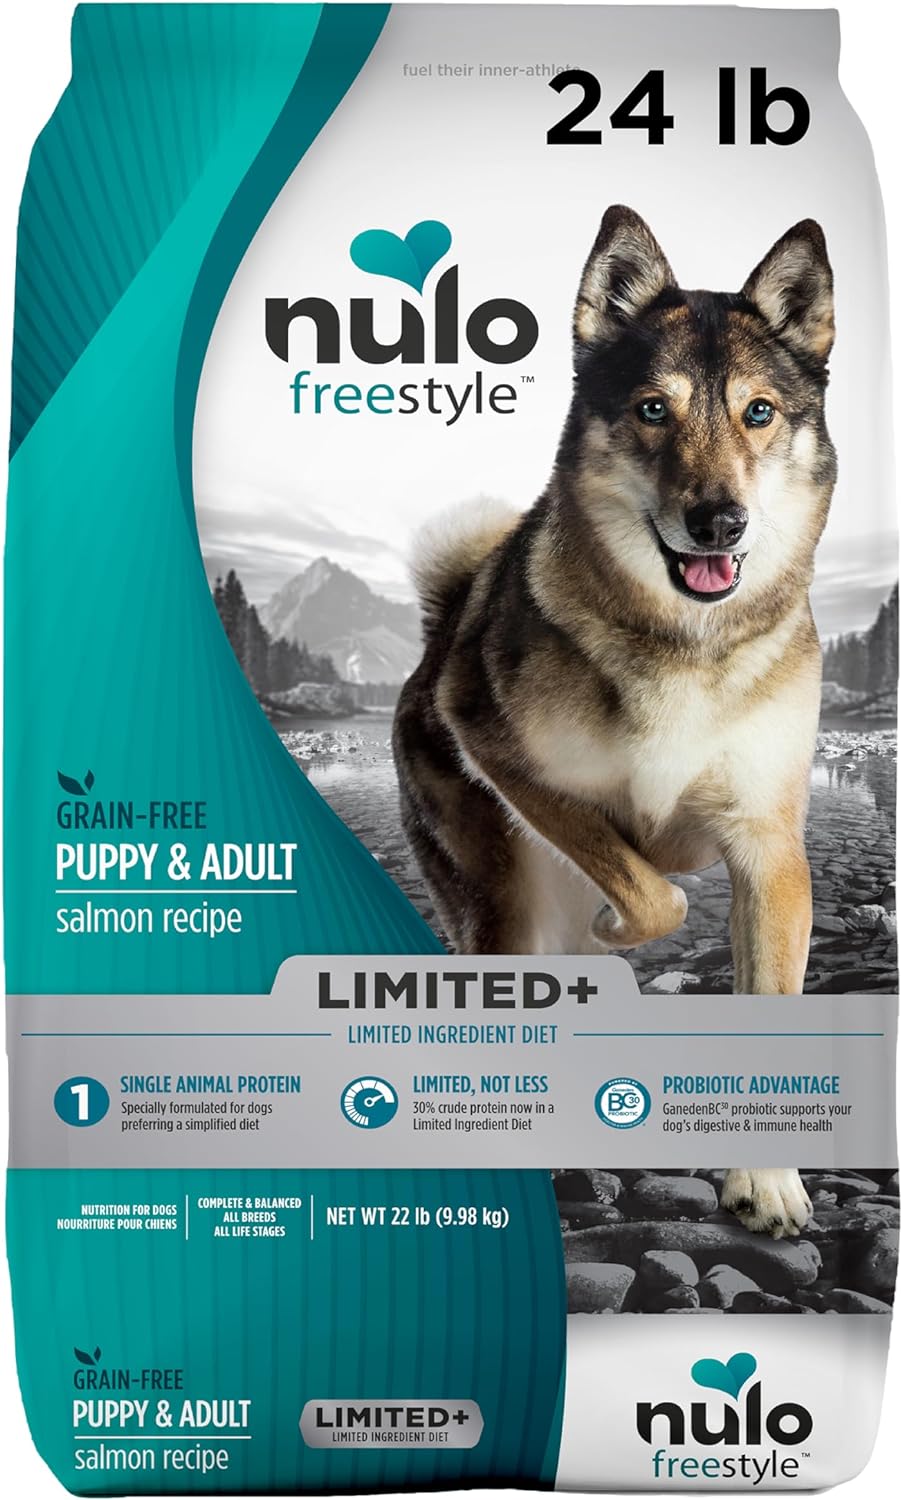 Nulo Freestyle All Breed Dog Food, Premium Allergy Friendly Adult & Puppy Grain-Free Dry Kibble Dog Food, Single Animal Protein with BC30 Probiotic for Healthy Digestive Support 24 Pound (Pack of 1)